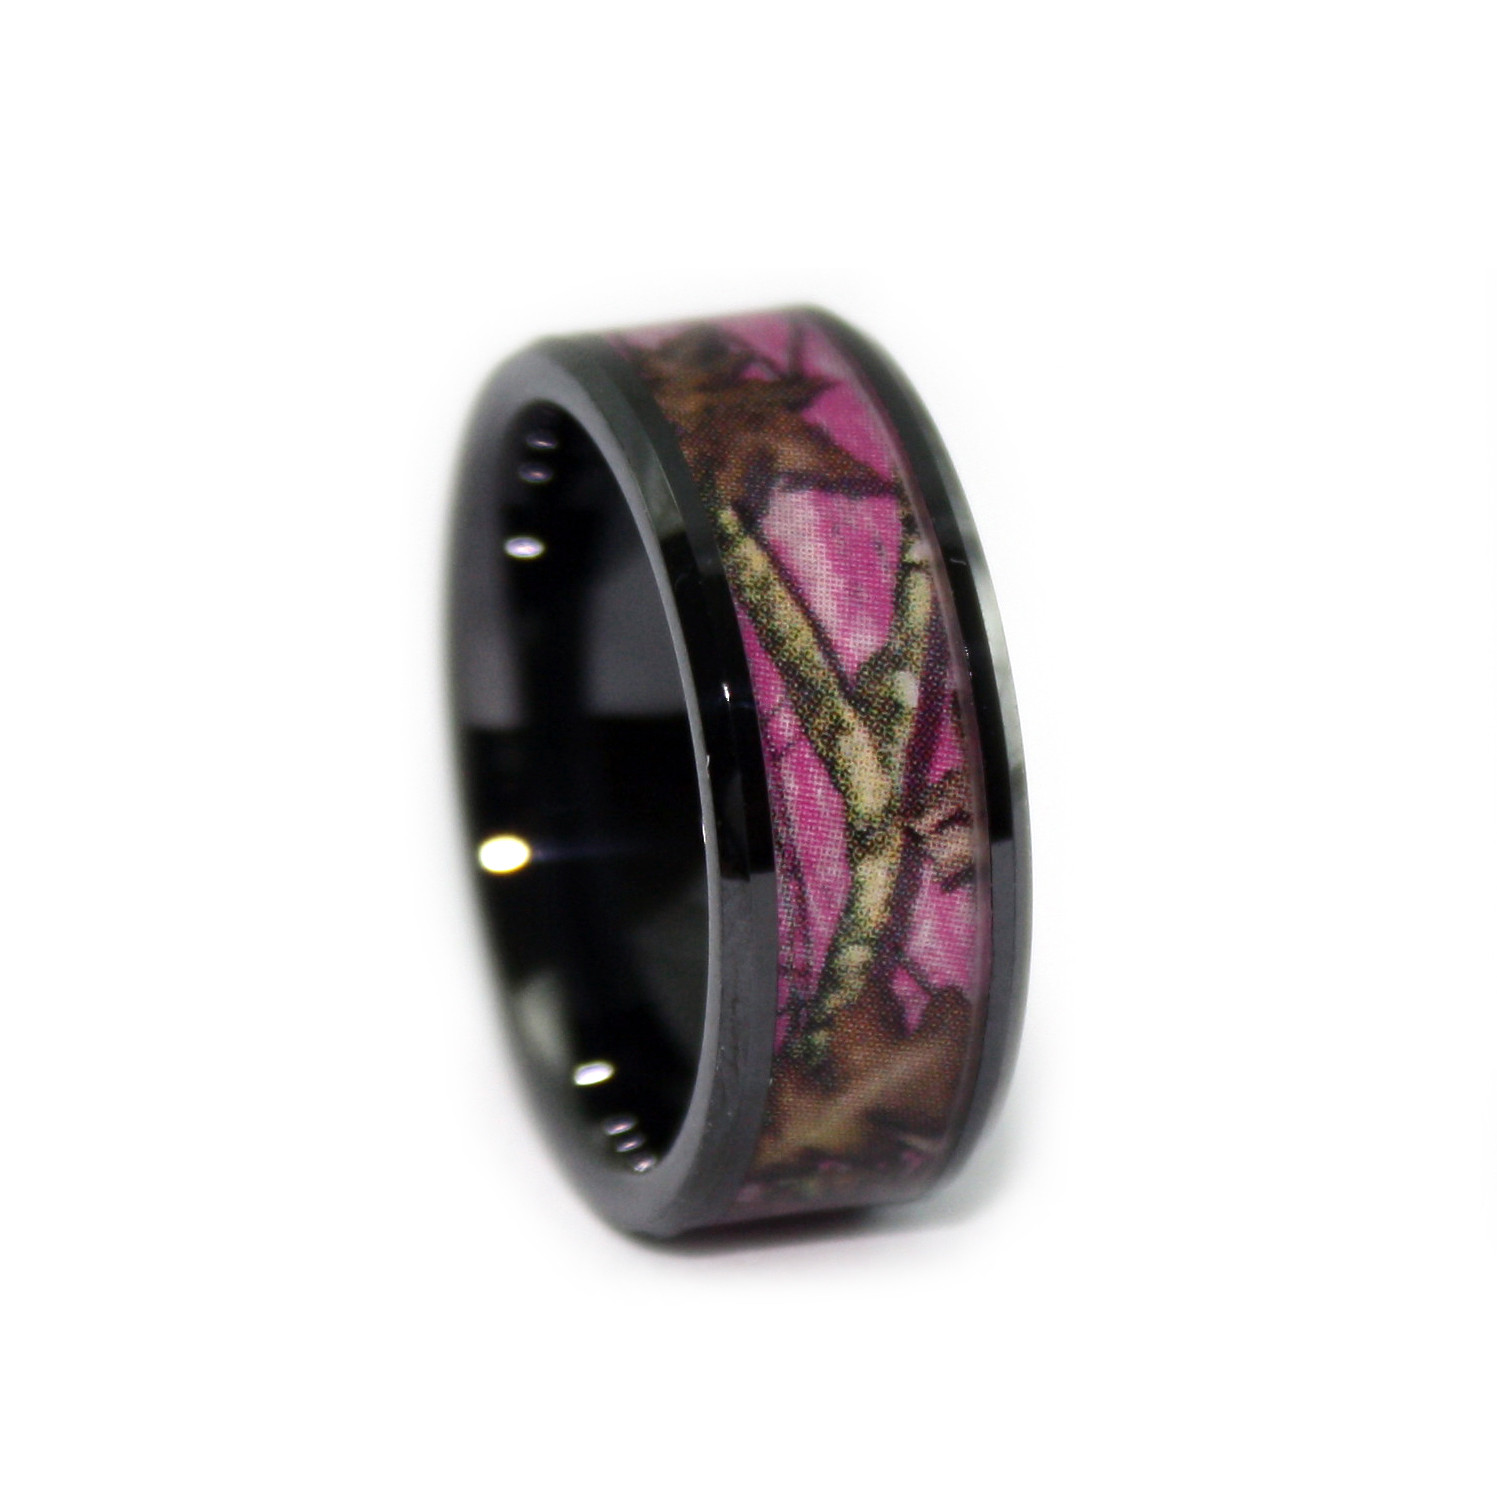 Pink Camouflage Wedding Rings
 Pink Camo Wedding Rings Black Ceramic Band by 1 CAMO